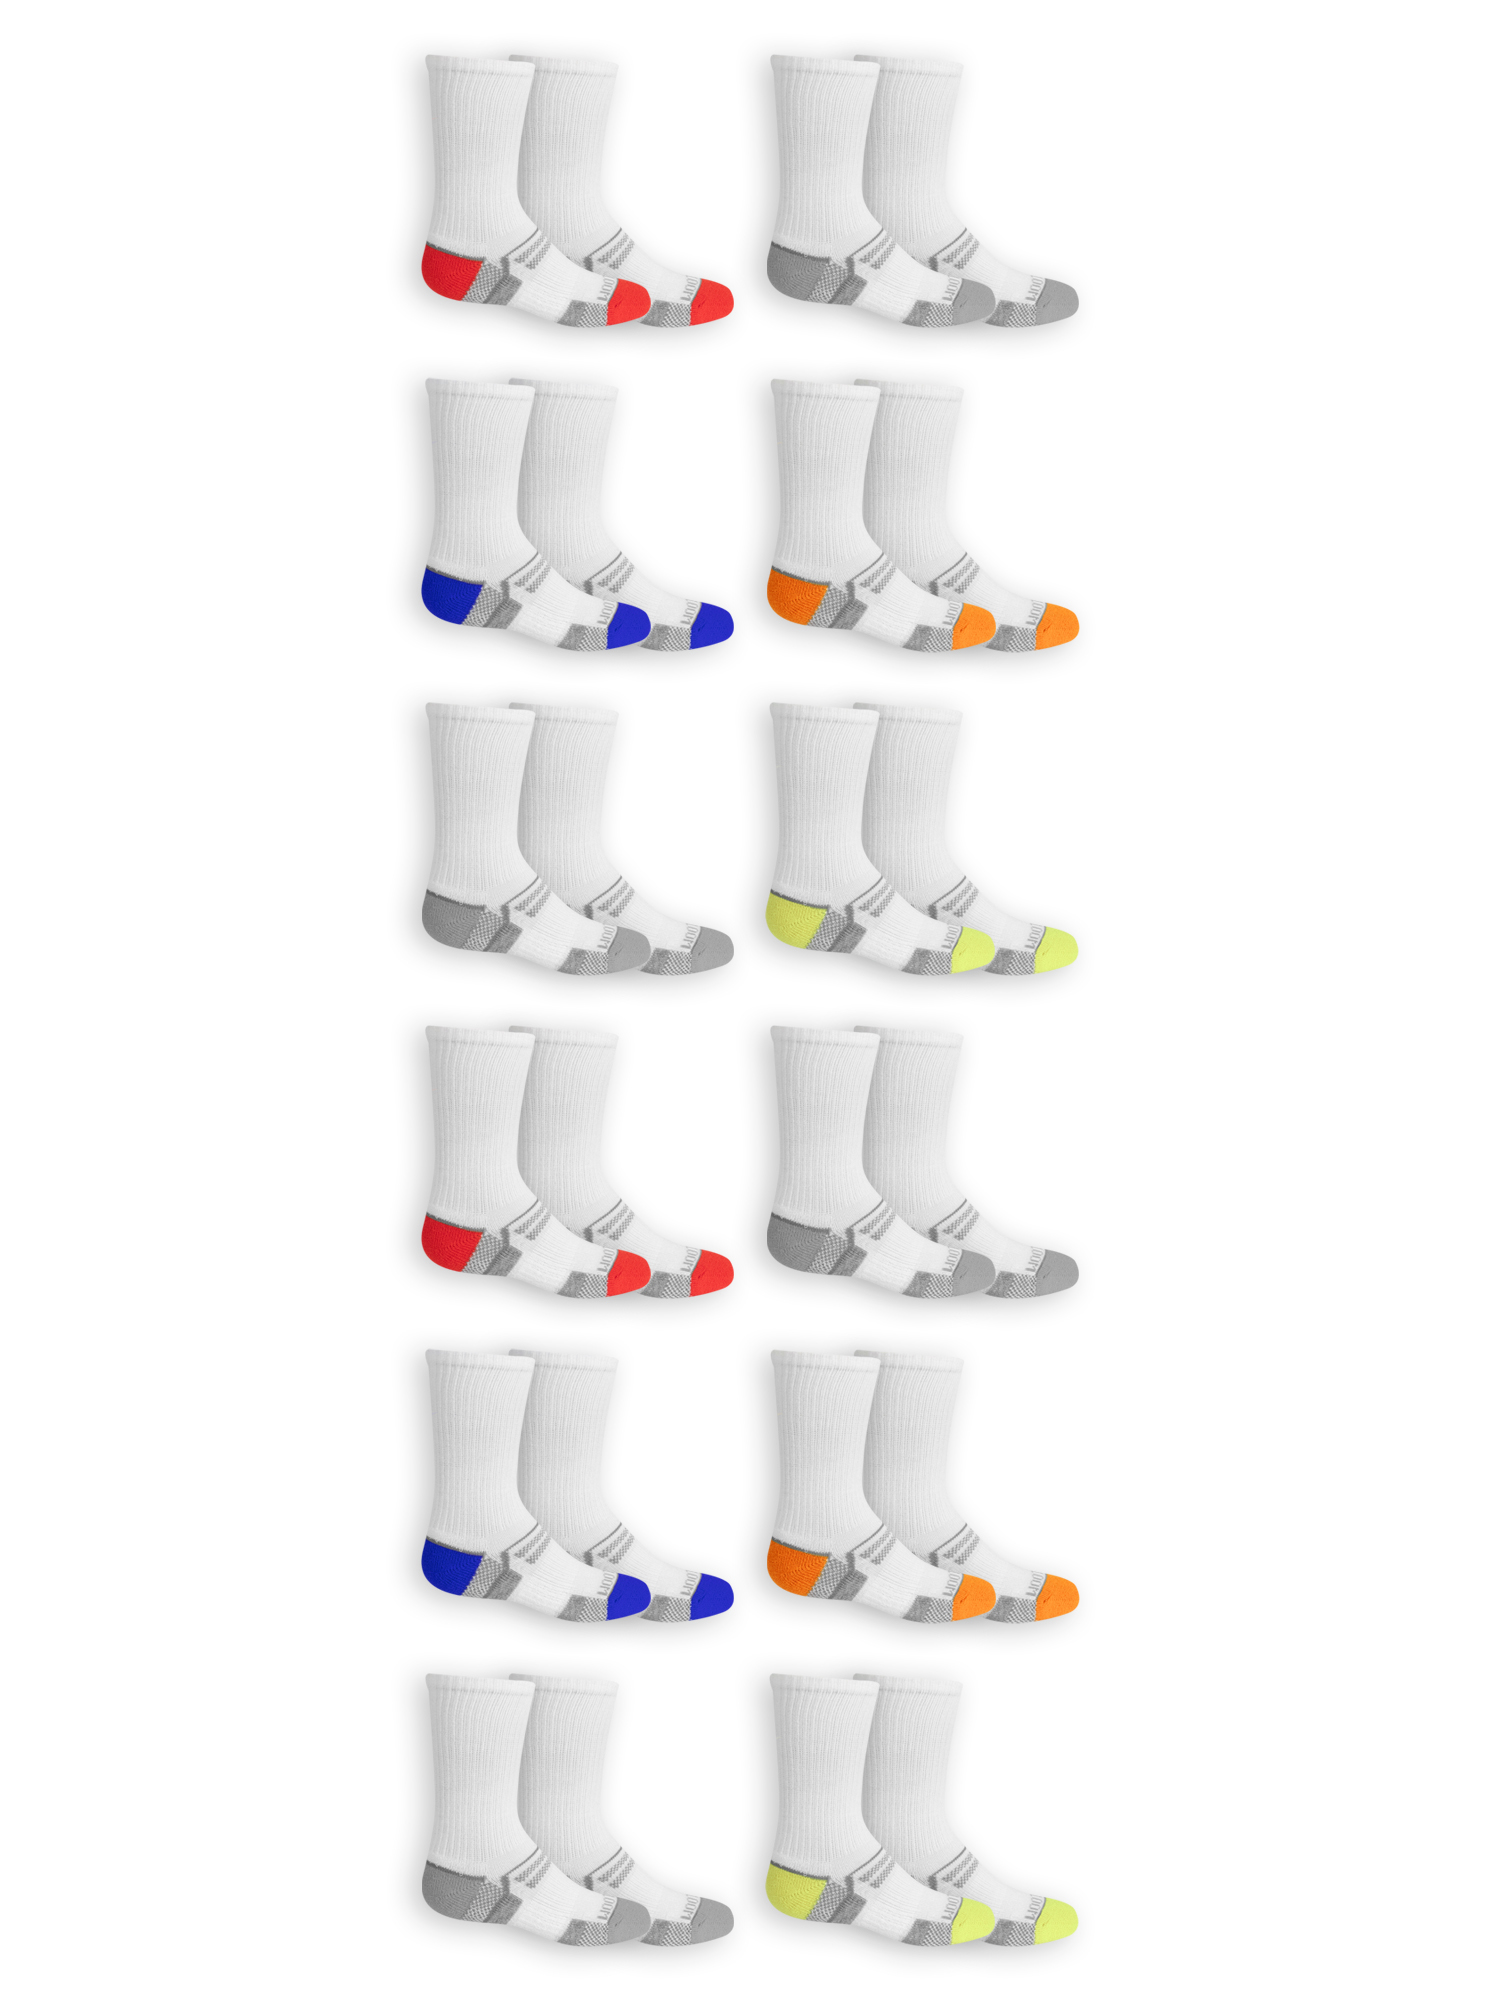 Fruit of the Loom Boys Active Crew Socks, 12 Pack, Sizes S-L - image 4 of 5